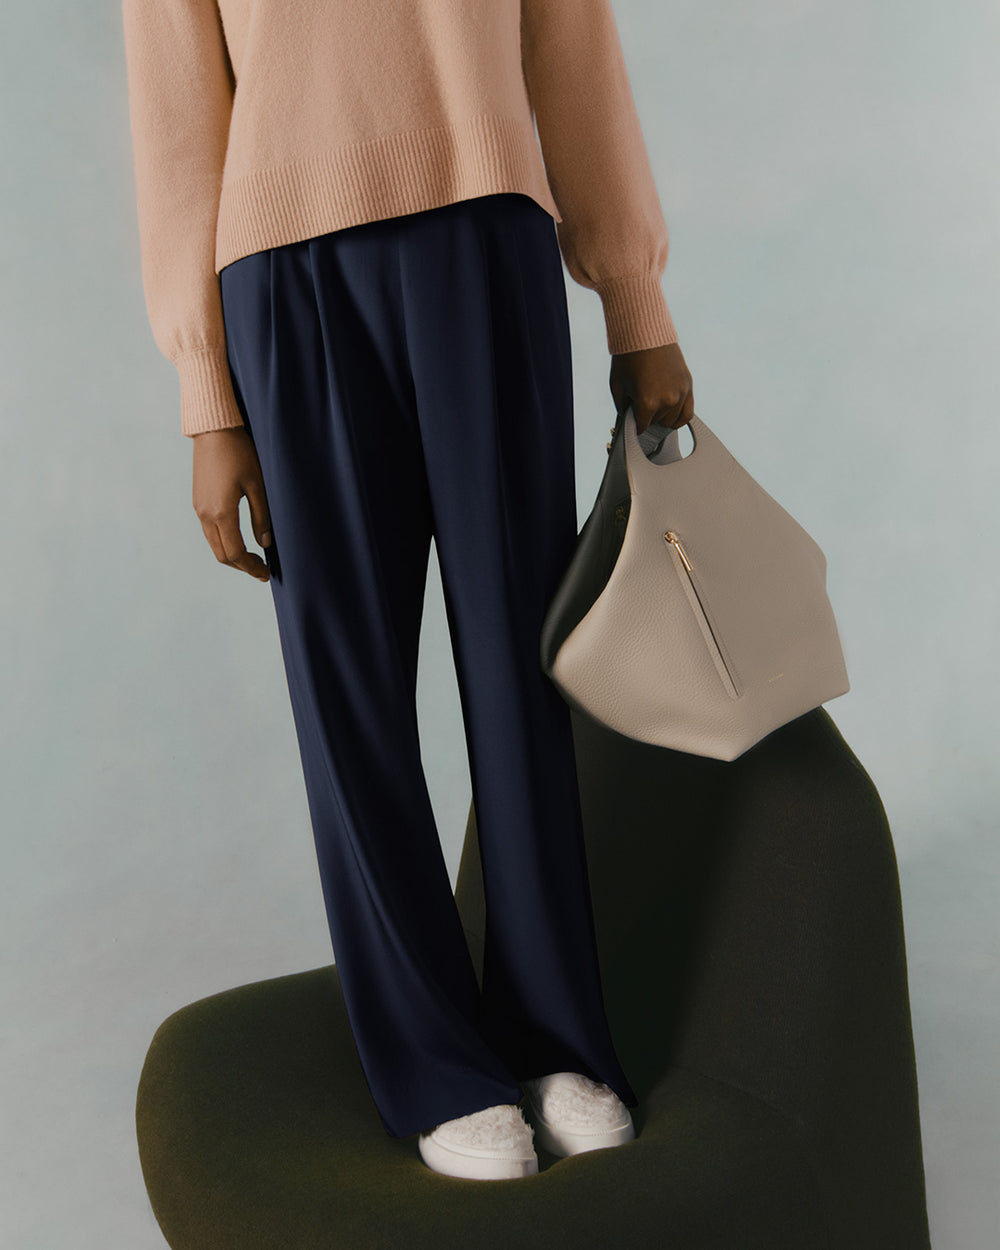 Person standing with a handbag, wearing sneakers and trousers.